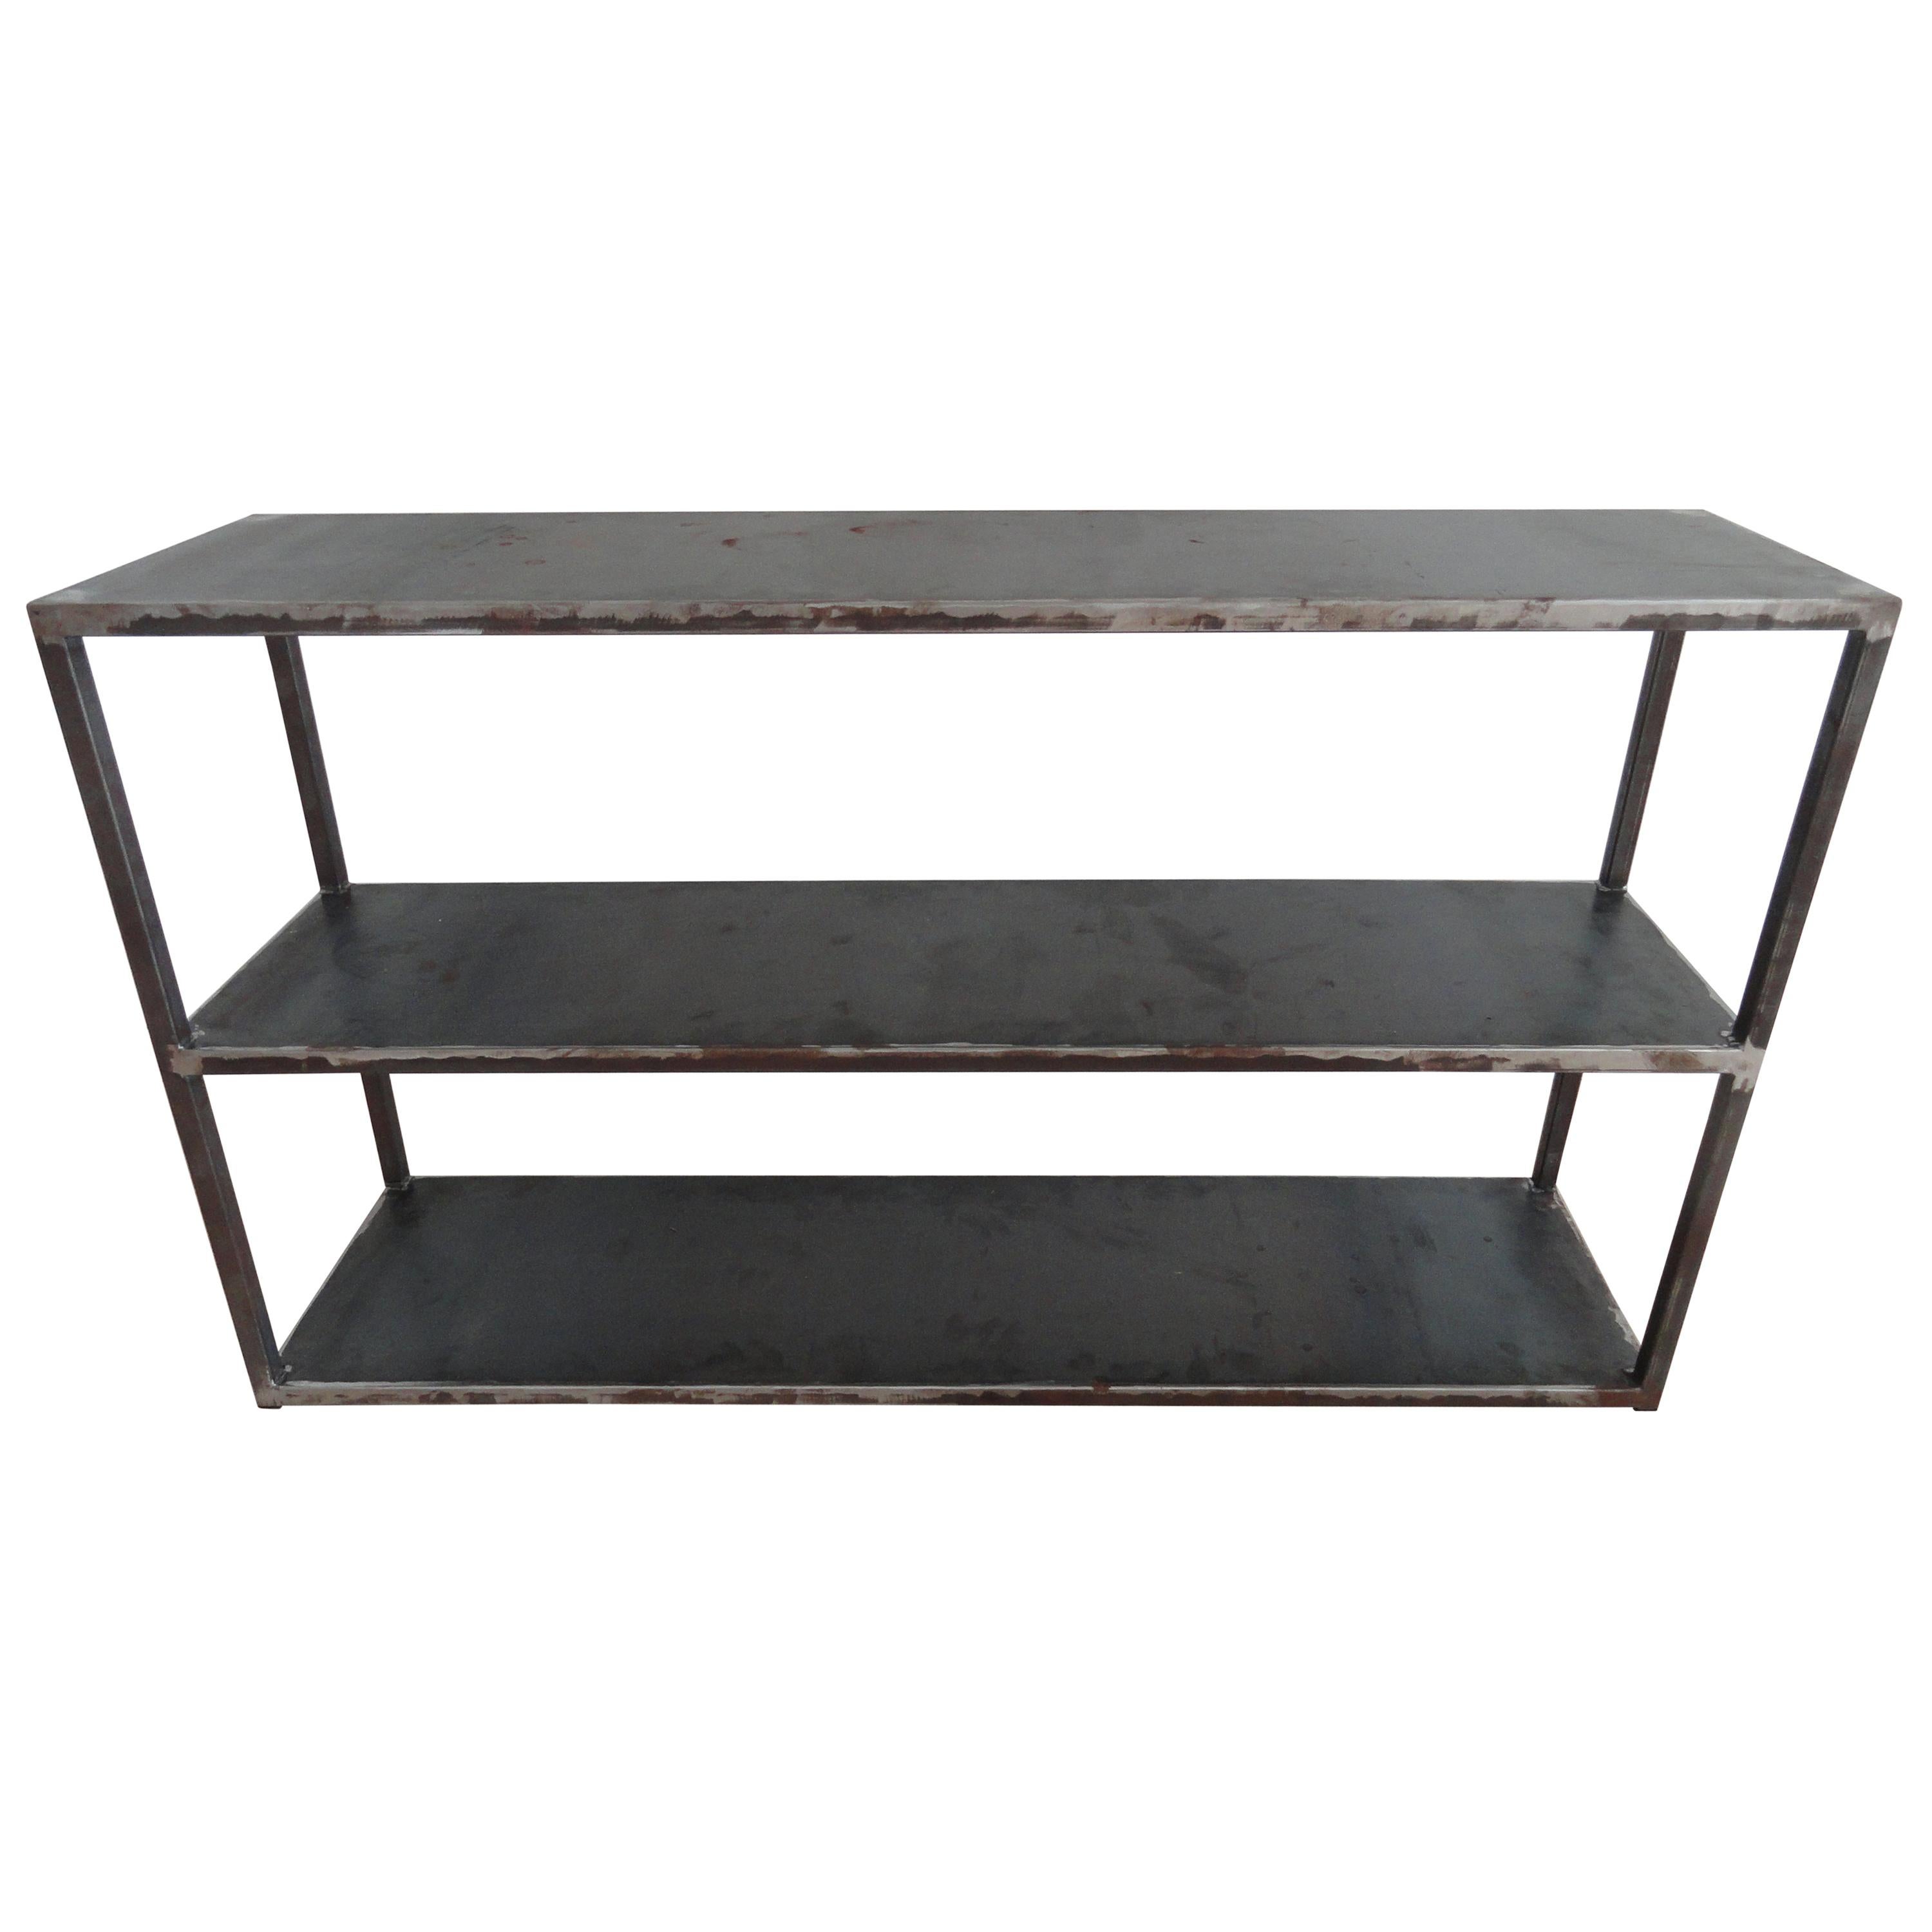 VDT Three-Tier Metal Table For Sale